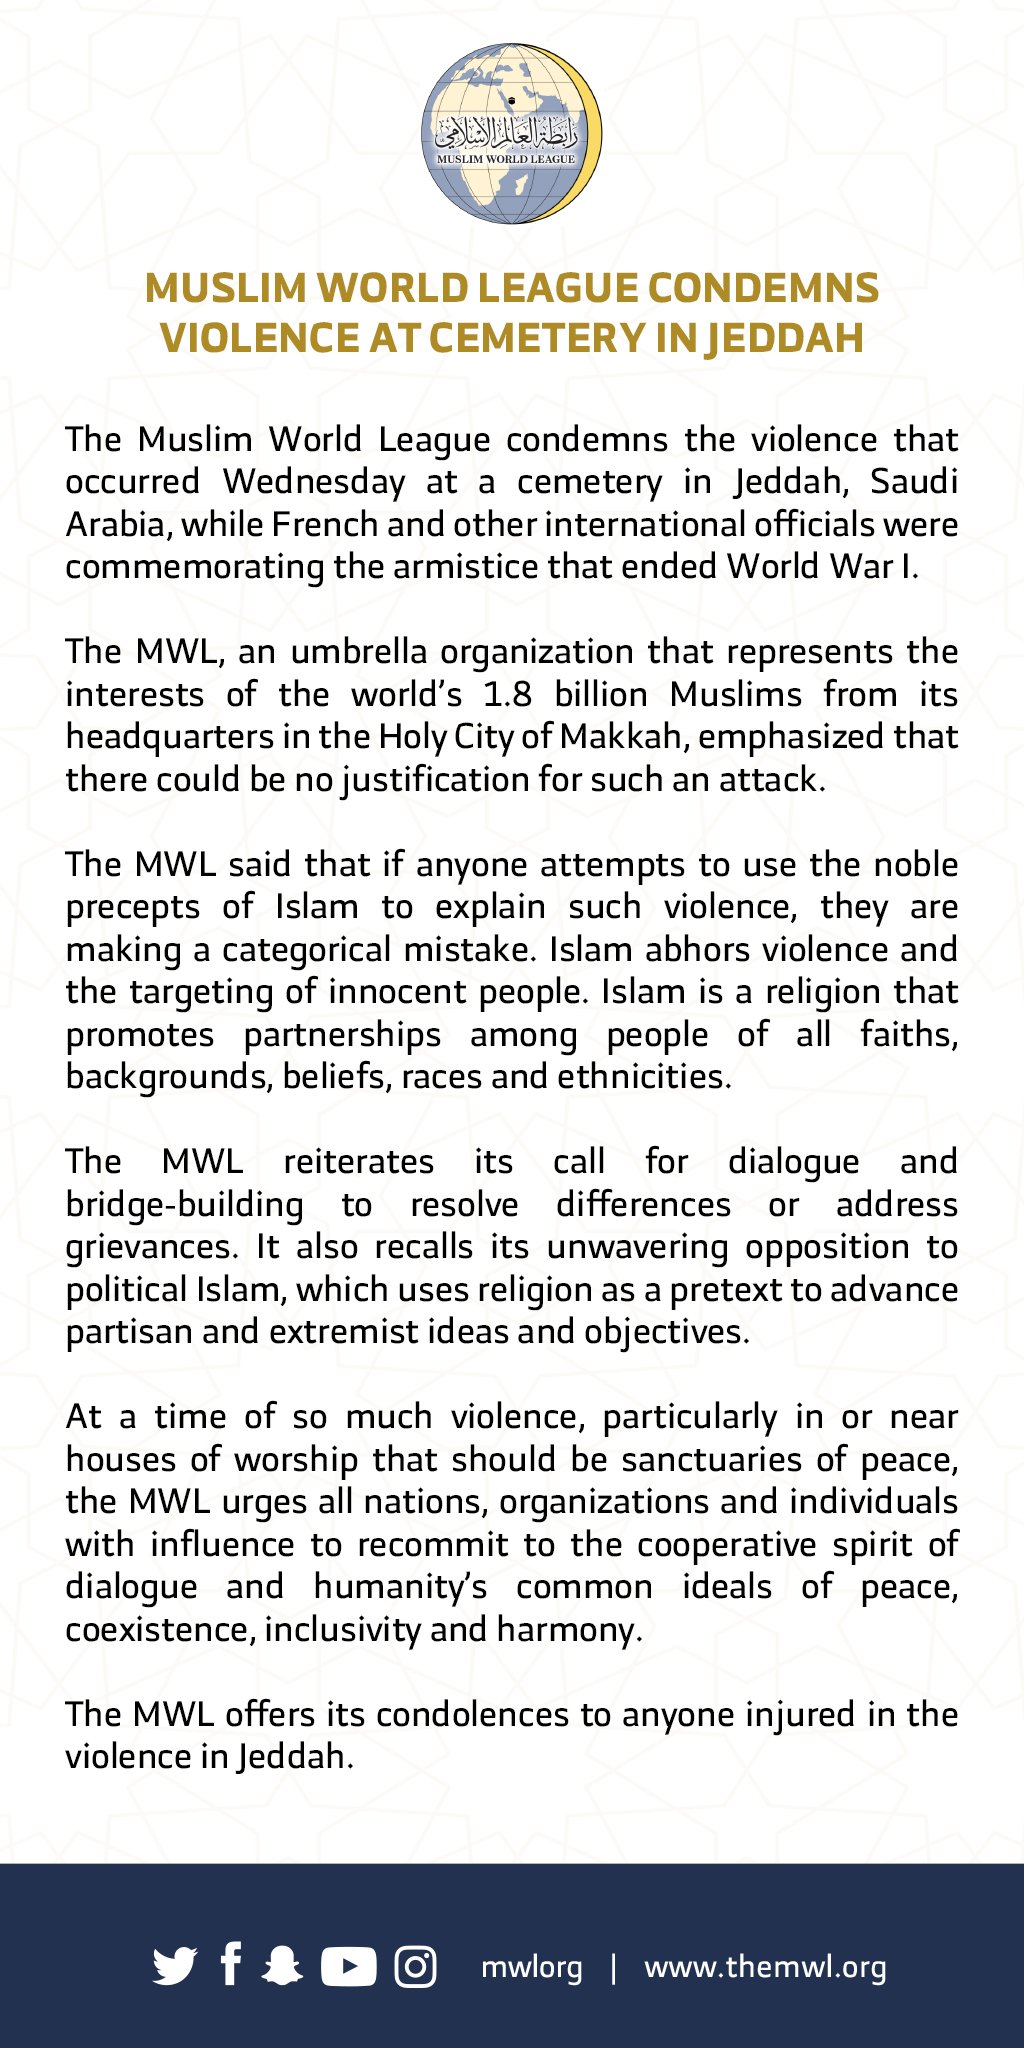 The Muslim World League condemns today's violence at a cemetery in Jeddah. Read the latest statement from the HE Dr. Mohammad Alissa: